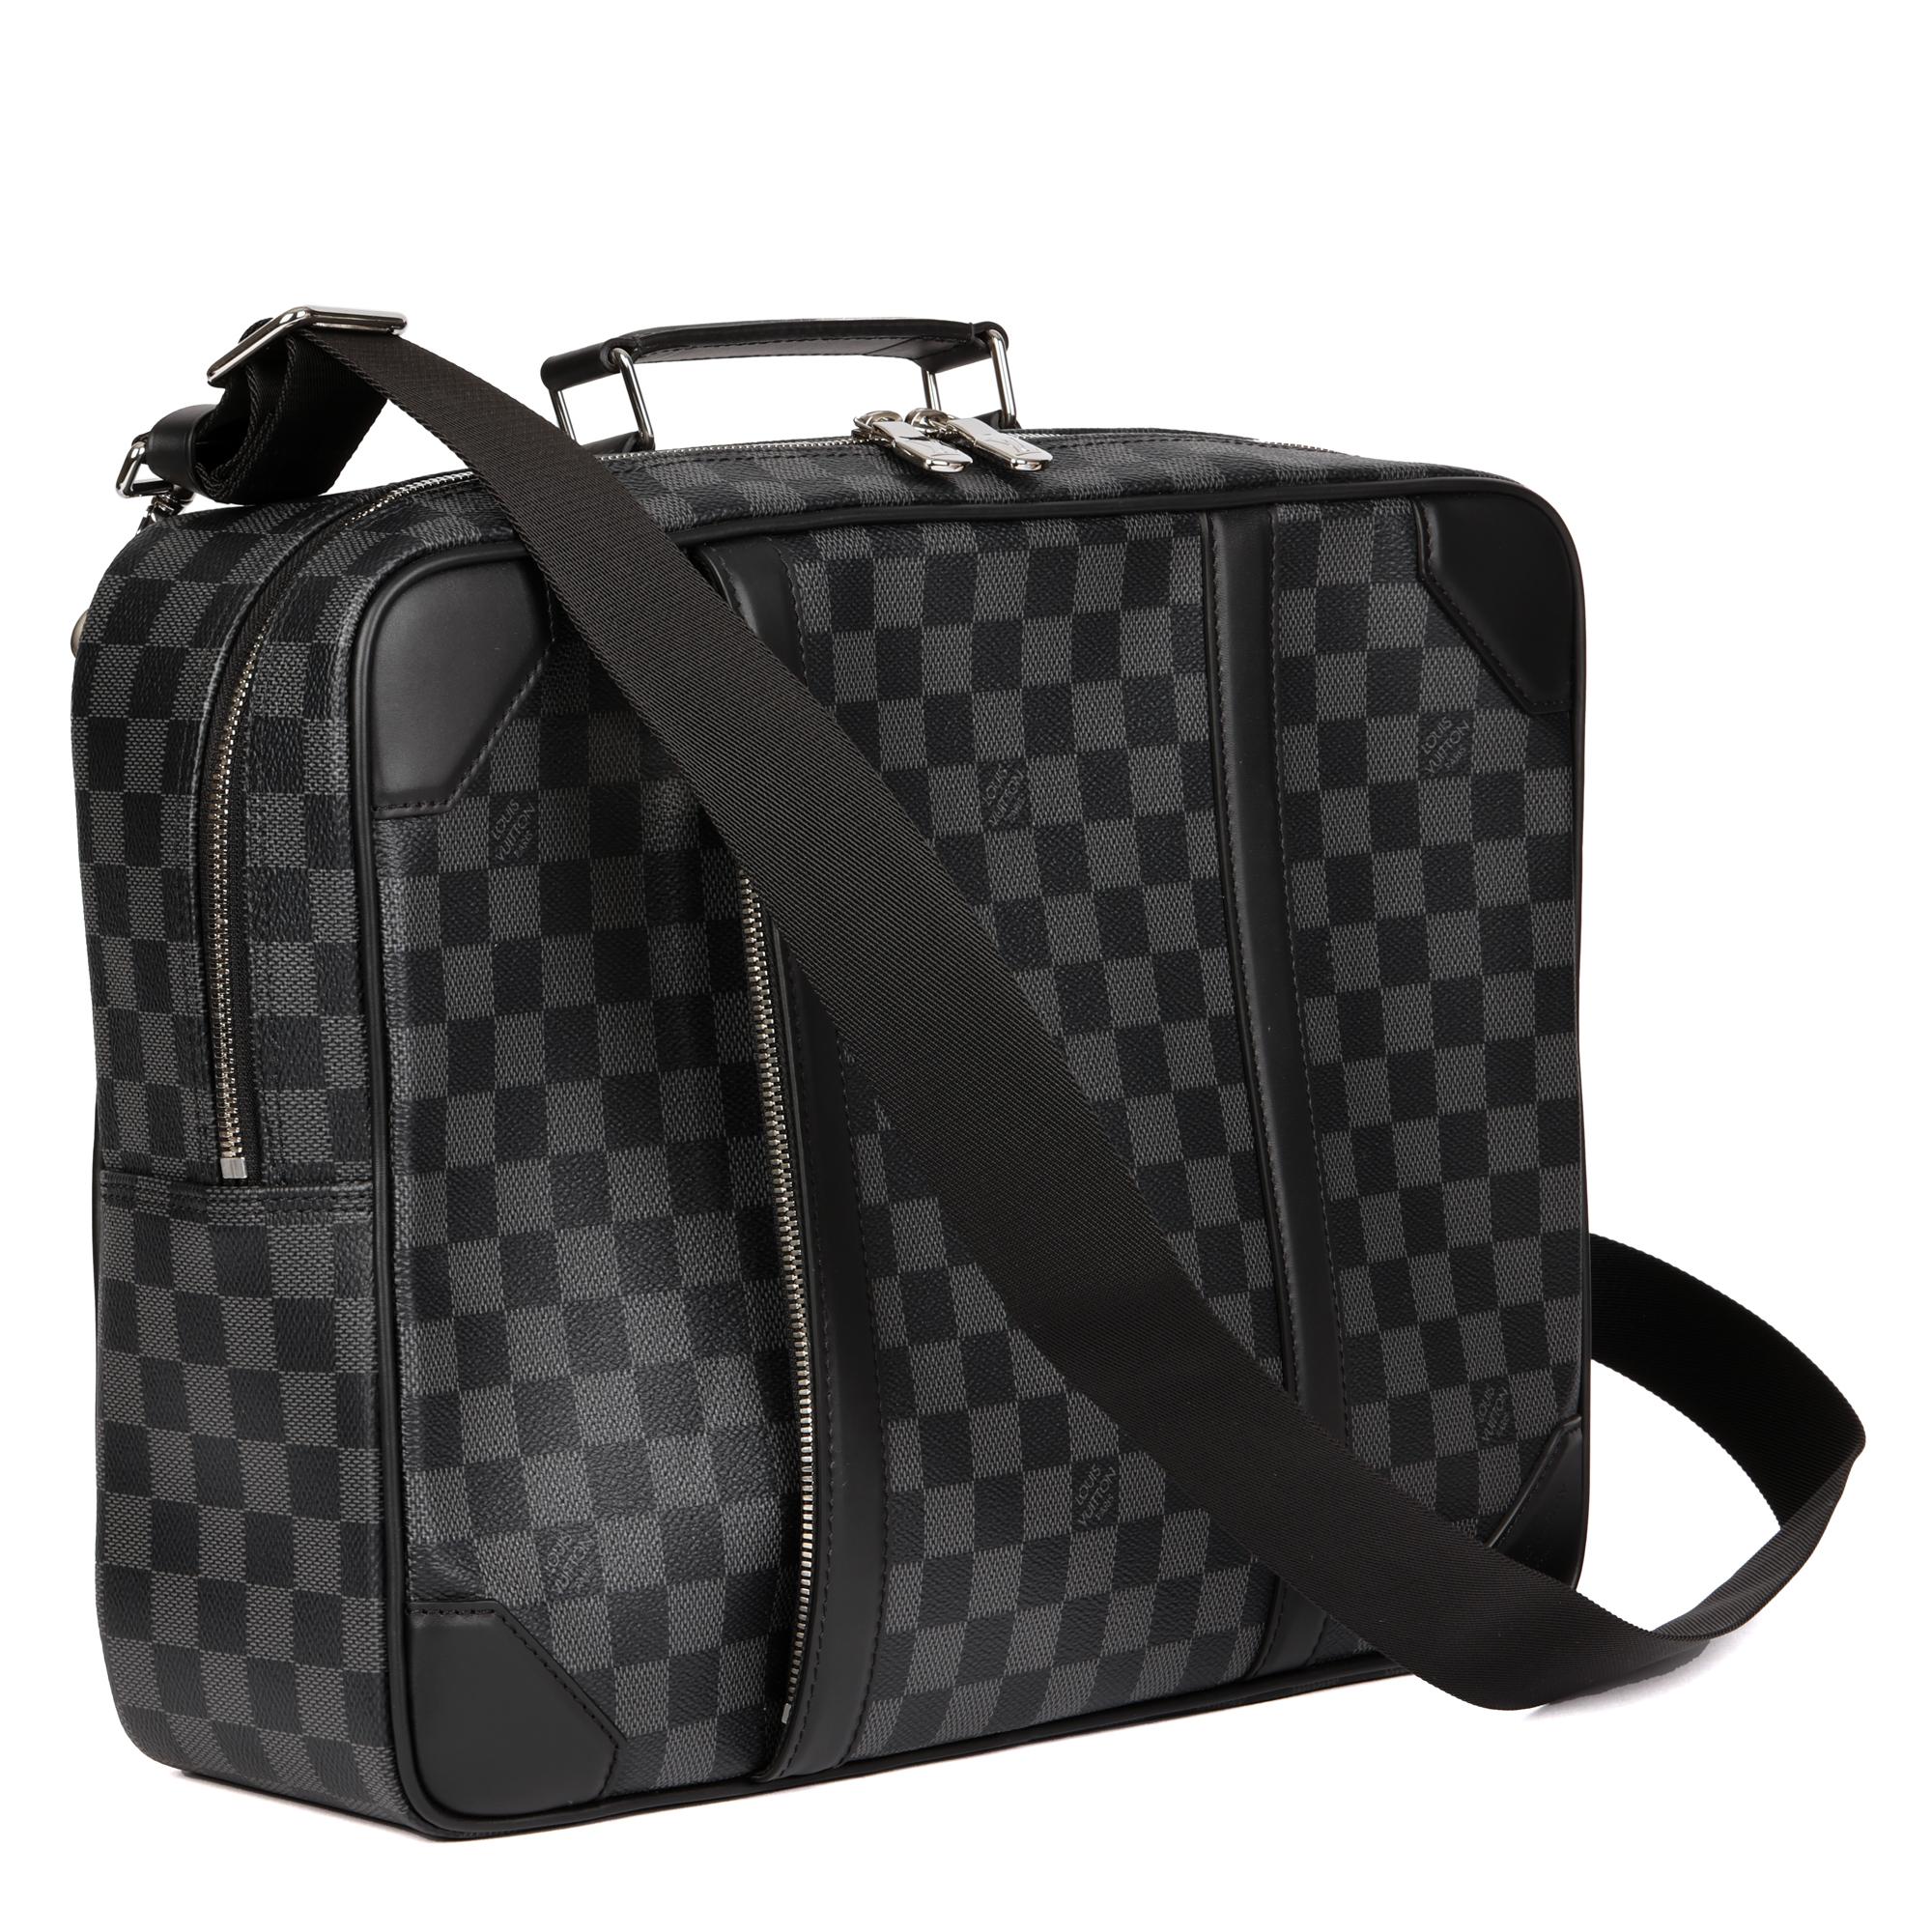 LOUIS VUITTON
Damier Graphite Coated Canvas & Calfskin Leather Briefcase Backpack

Xupes Reference: CB709
Serial Number: (Micro Chipped)
Age (Circa): 2022
Accompanied By: Louis Vuitton Dust Bag, Box
Authenticity Details: Microchip (Made in